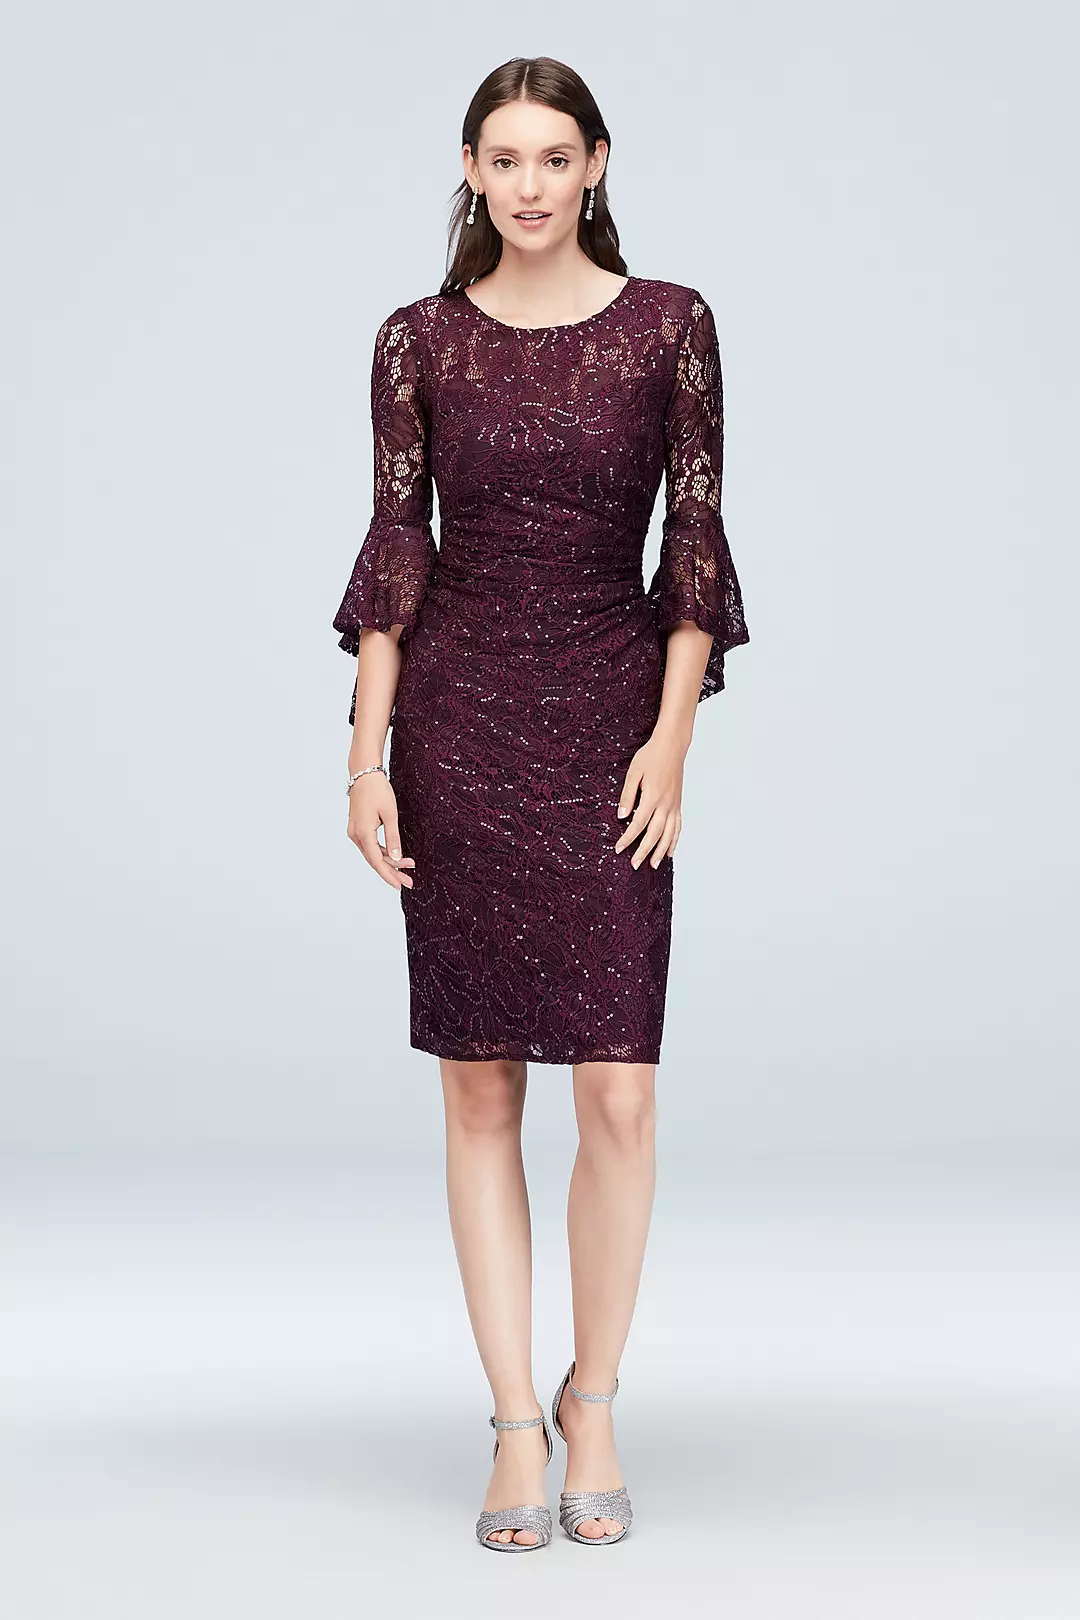 Draped Bell Sleeve Glitter Lace Cocktail Dress Image